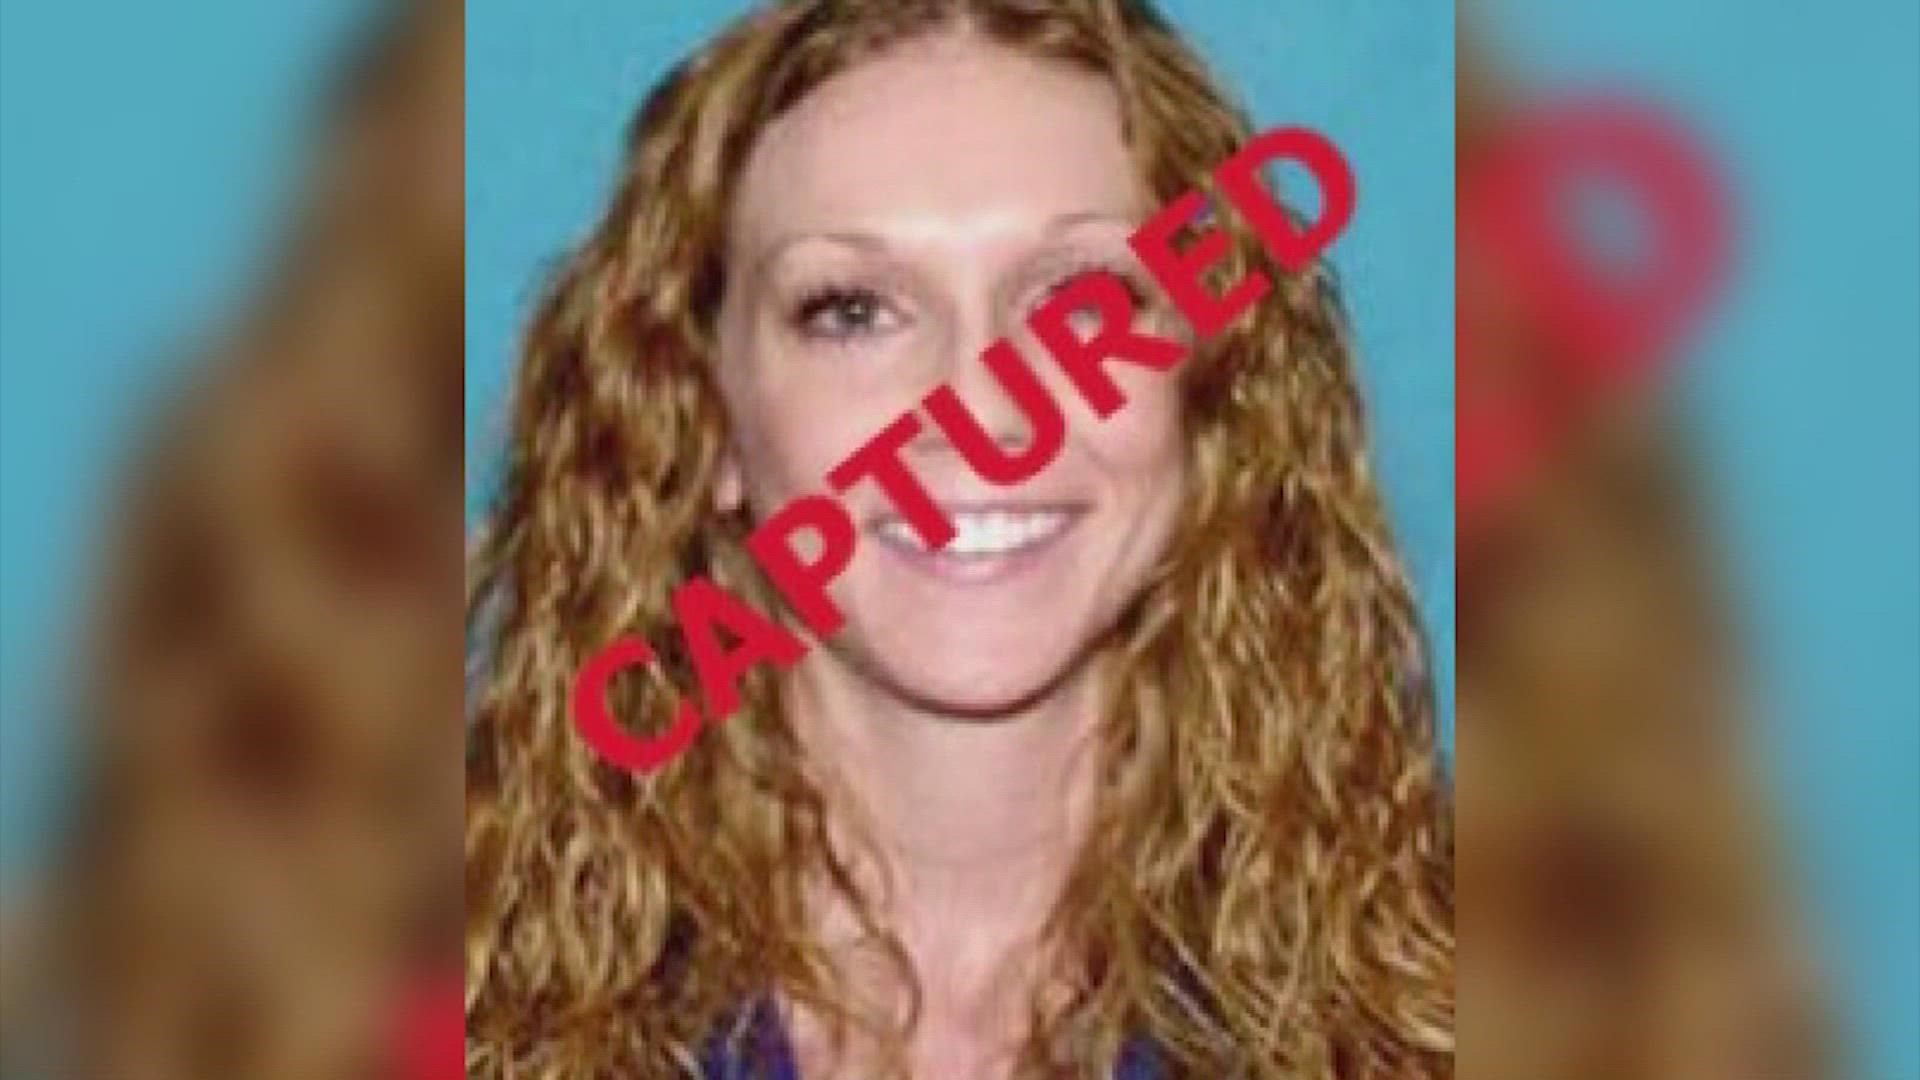 Kaitlin Marie Armstrong was captured in Costa Rica by U.S. Marshals. She's accused of killing Moriah Wilson back in May.